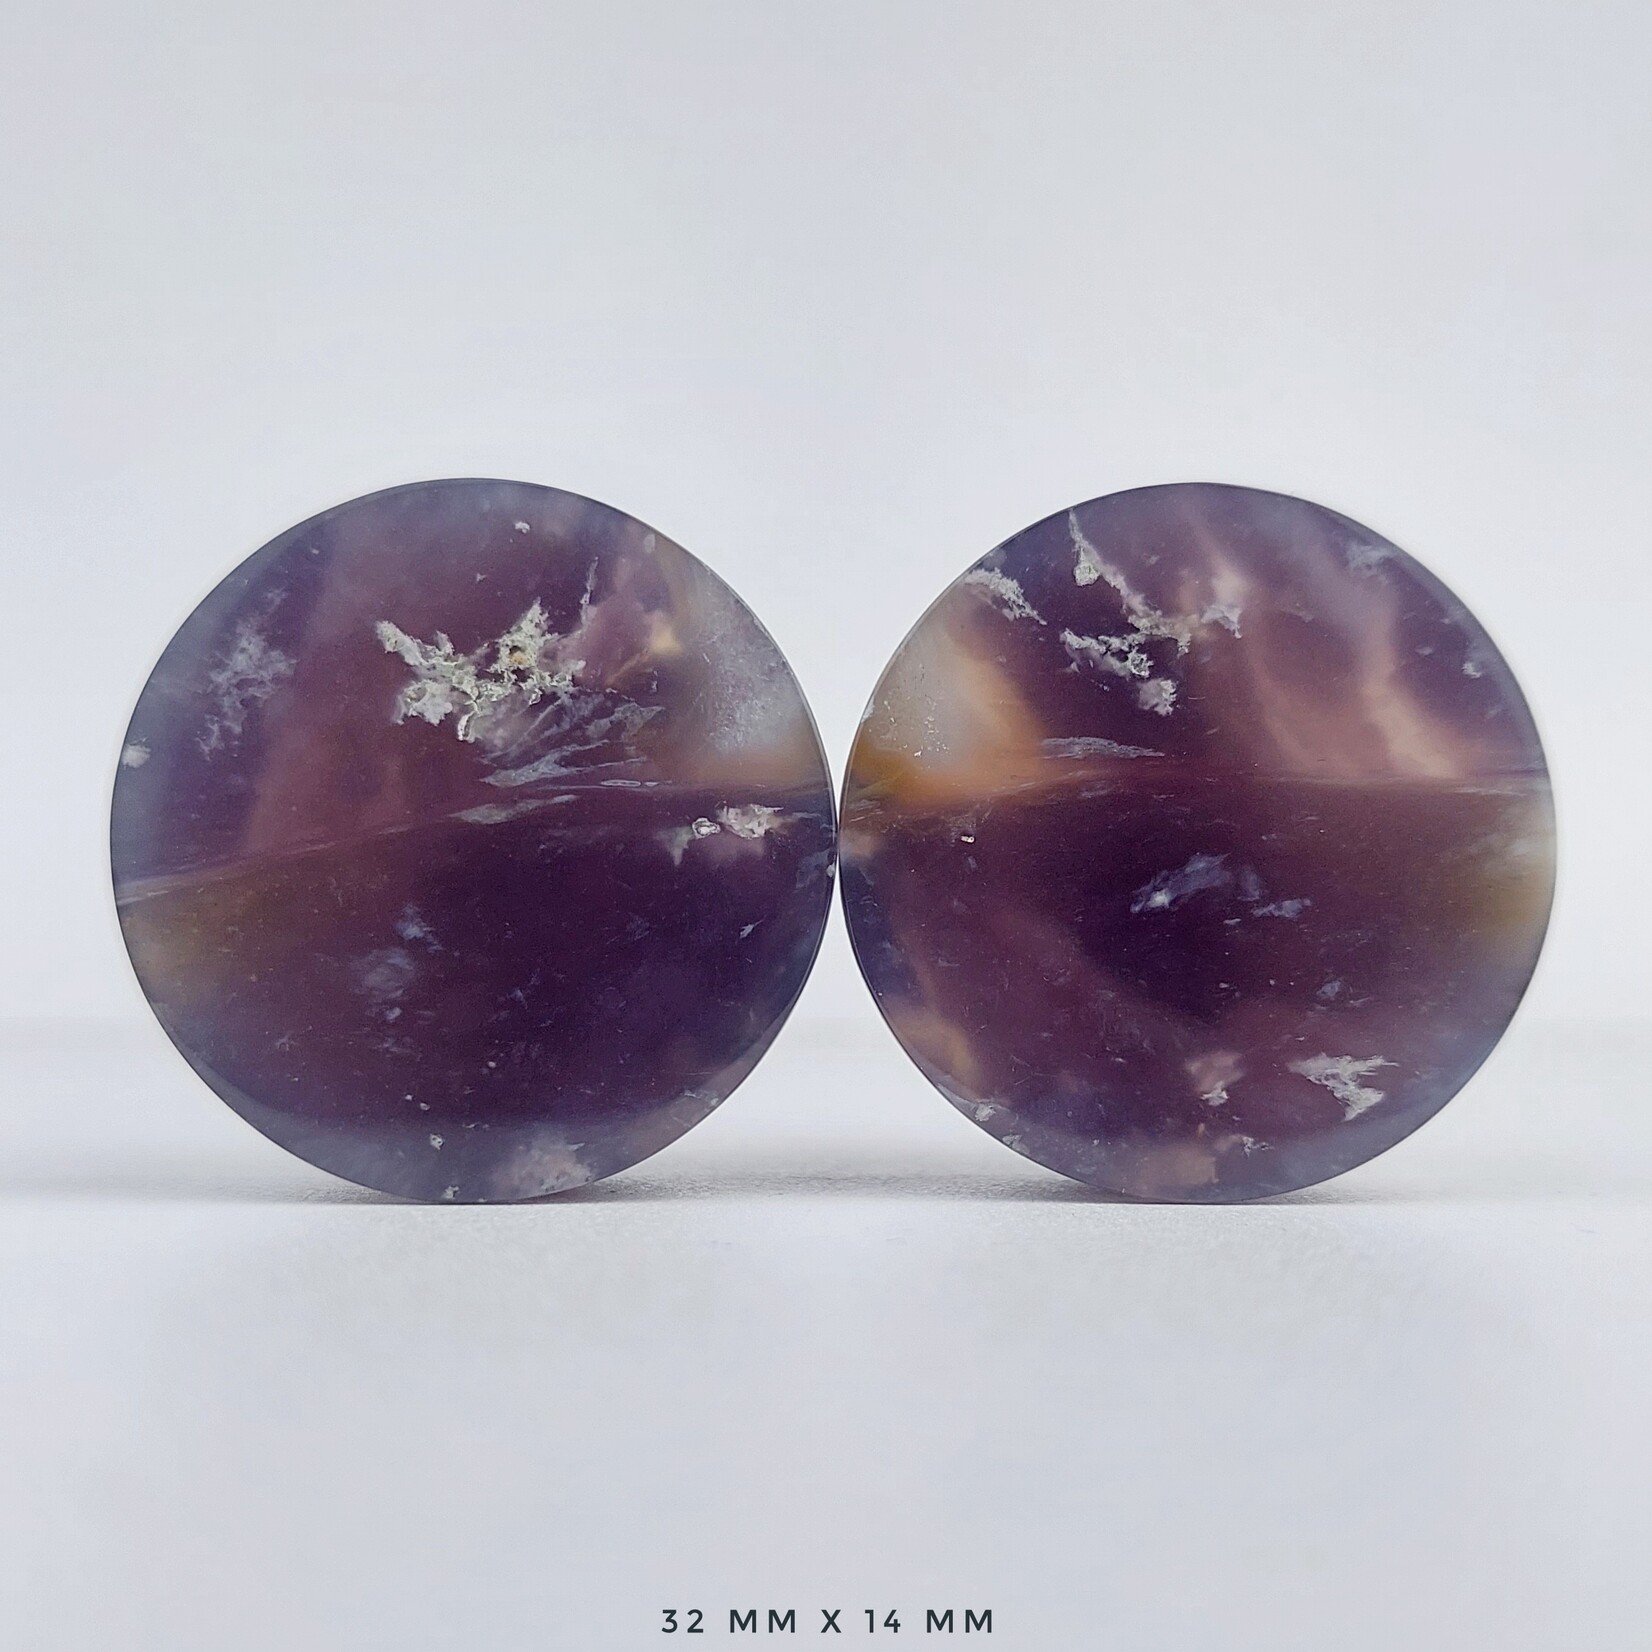 Grit Lapidary Grit Lapidary premium double flared Purple Chalcedony plugs